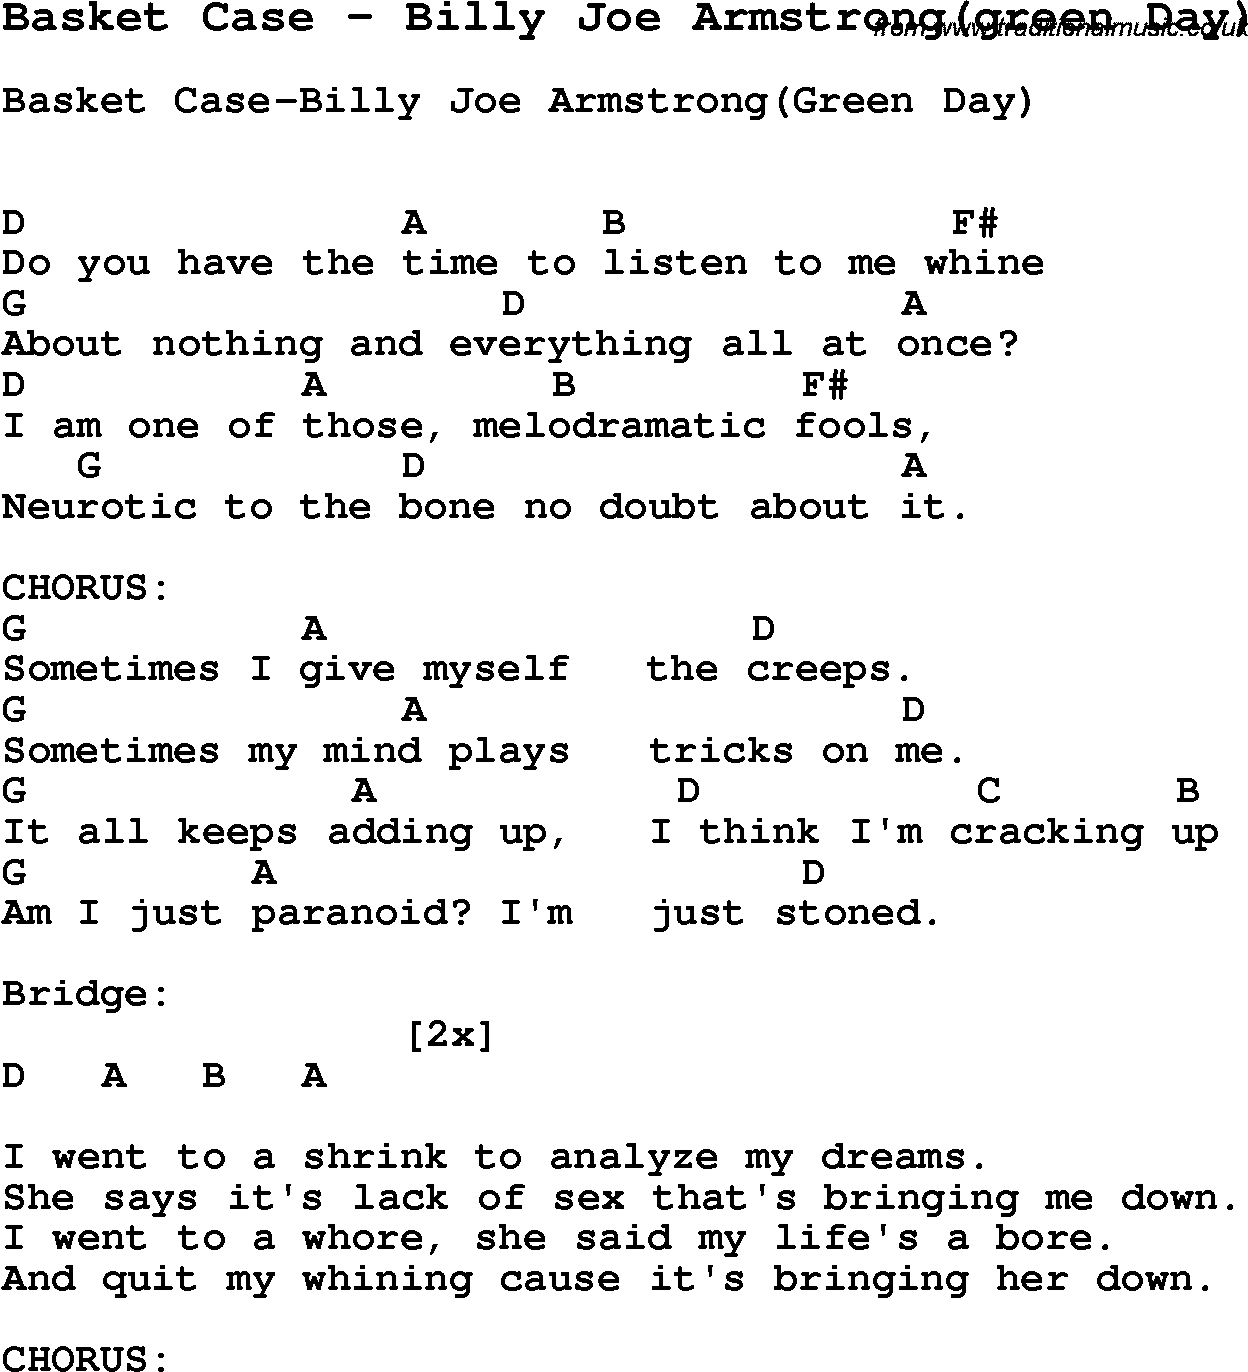 Song Basket Case by Billy Joe Armstrong(green Day), with lyrics for vocal performance and accompaniment chords for Ukulele, Guitar Banjo etc.